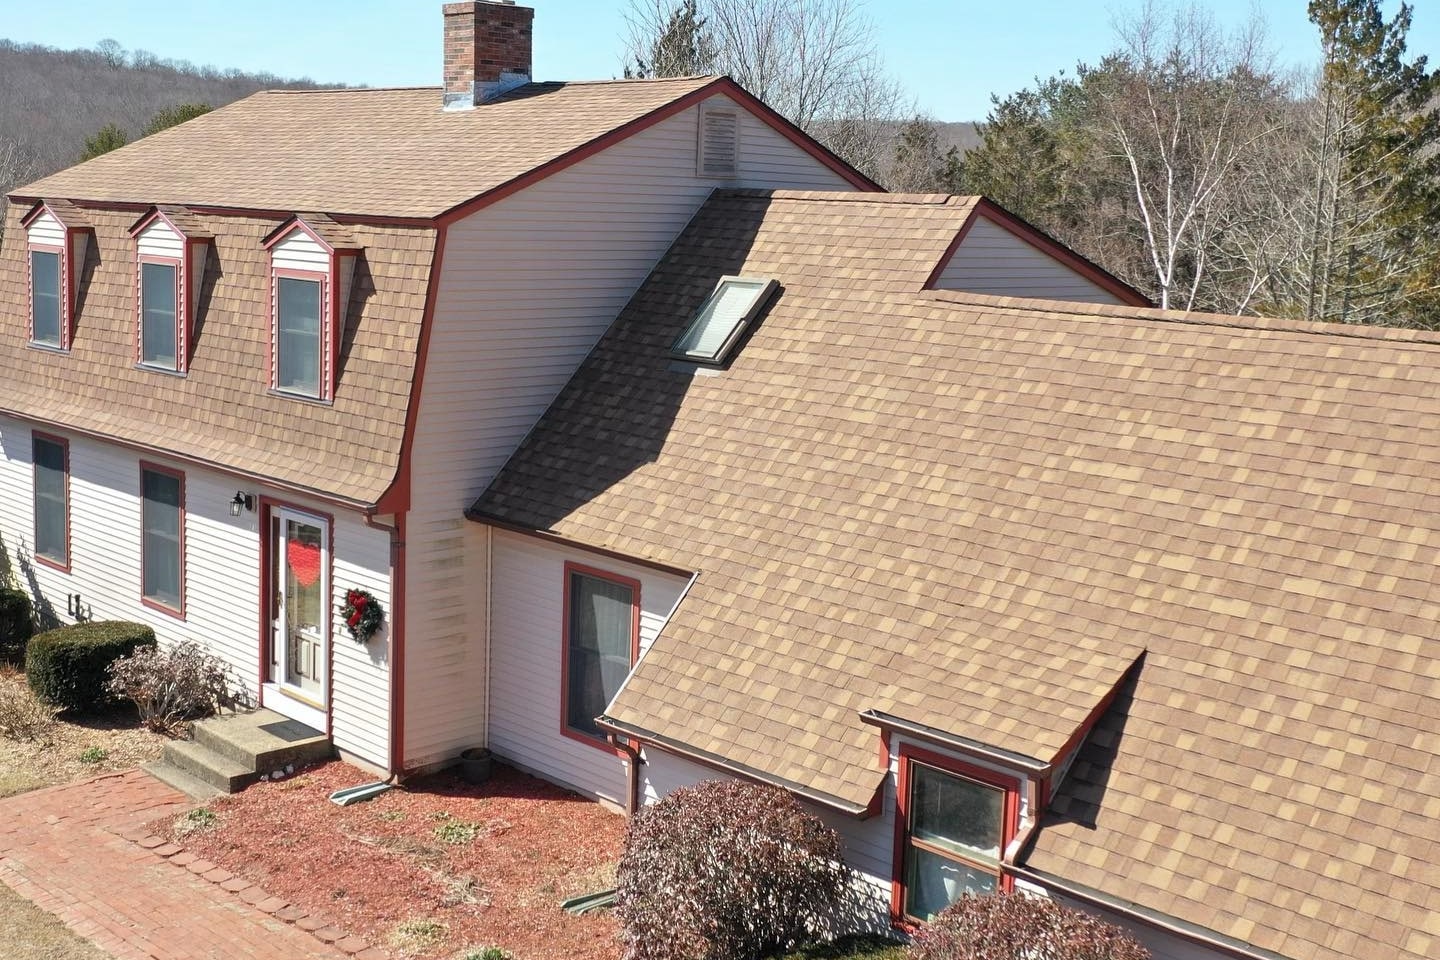 BP Builders in East lyme CT | Roofer, Roof Replacement, Roofing Company & General Contractor CT